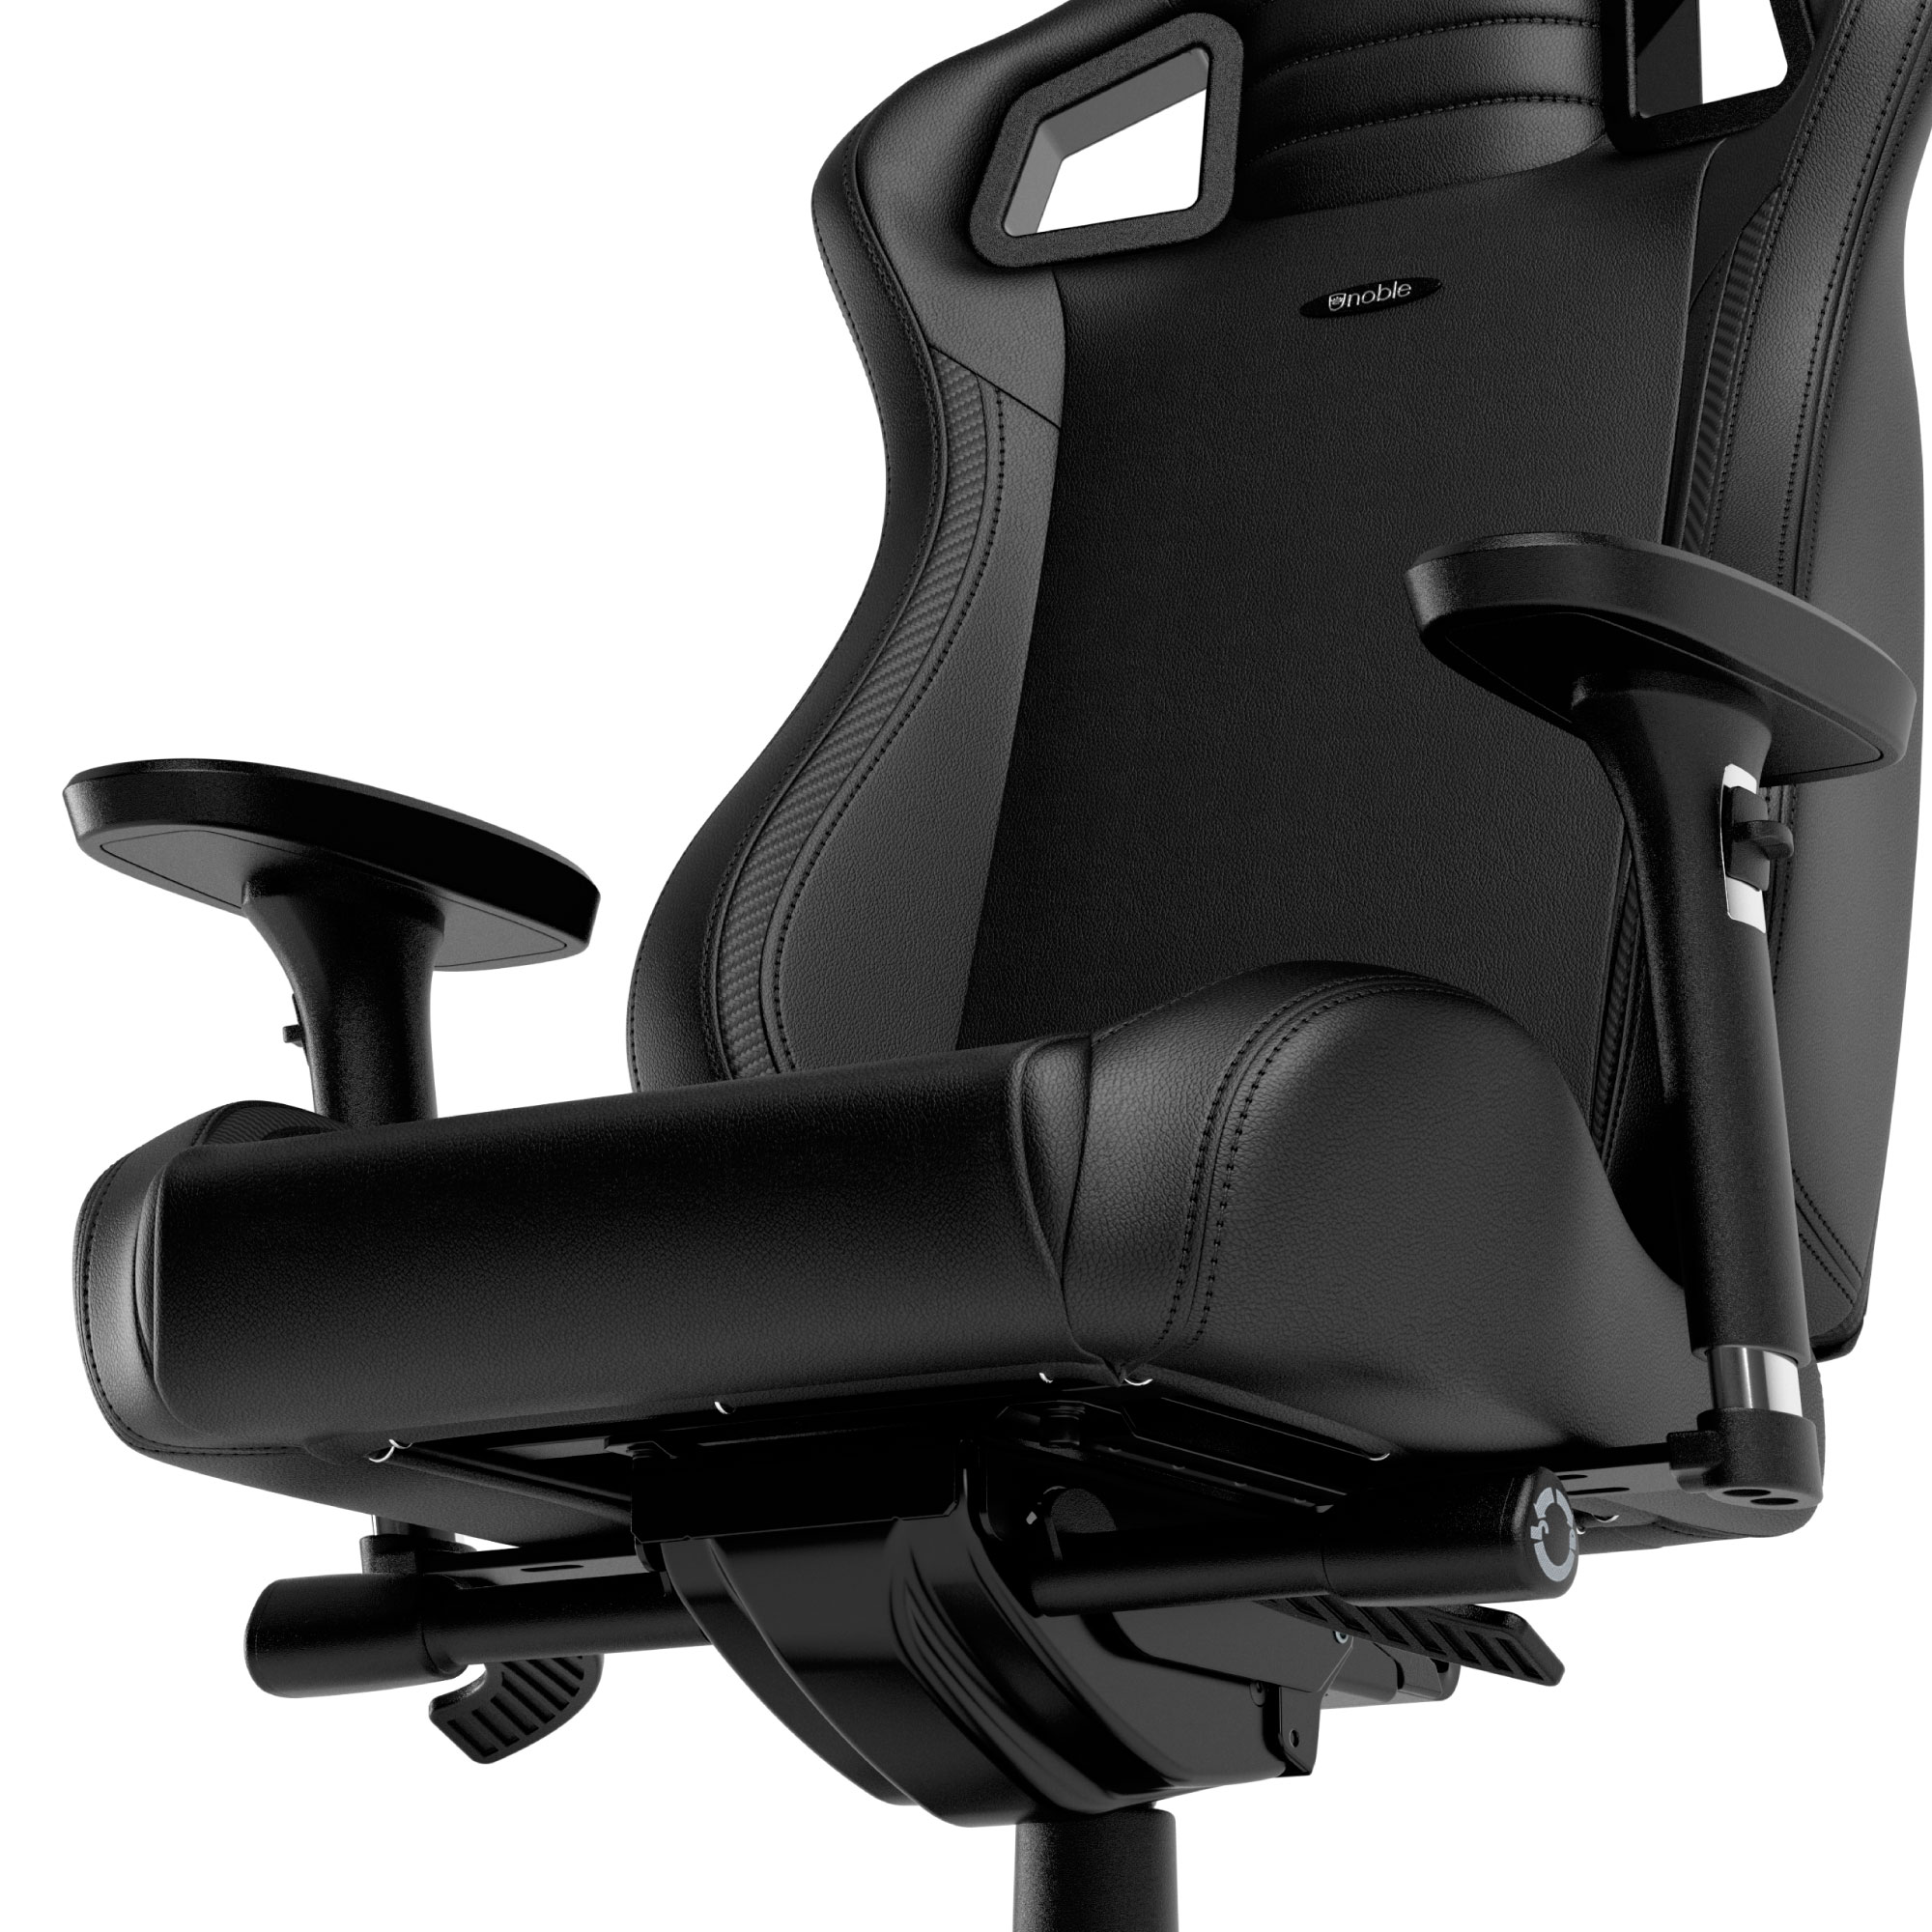 noblechairs EPIC  コンパクト　ゲーミングチェア　完成品デスクチェア